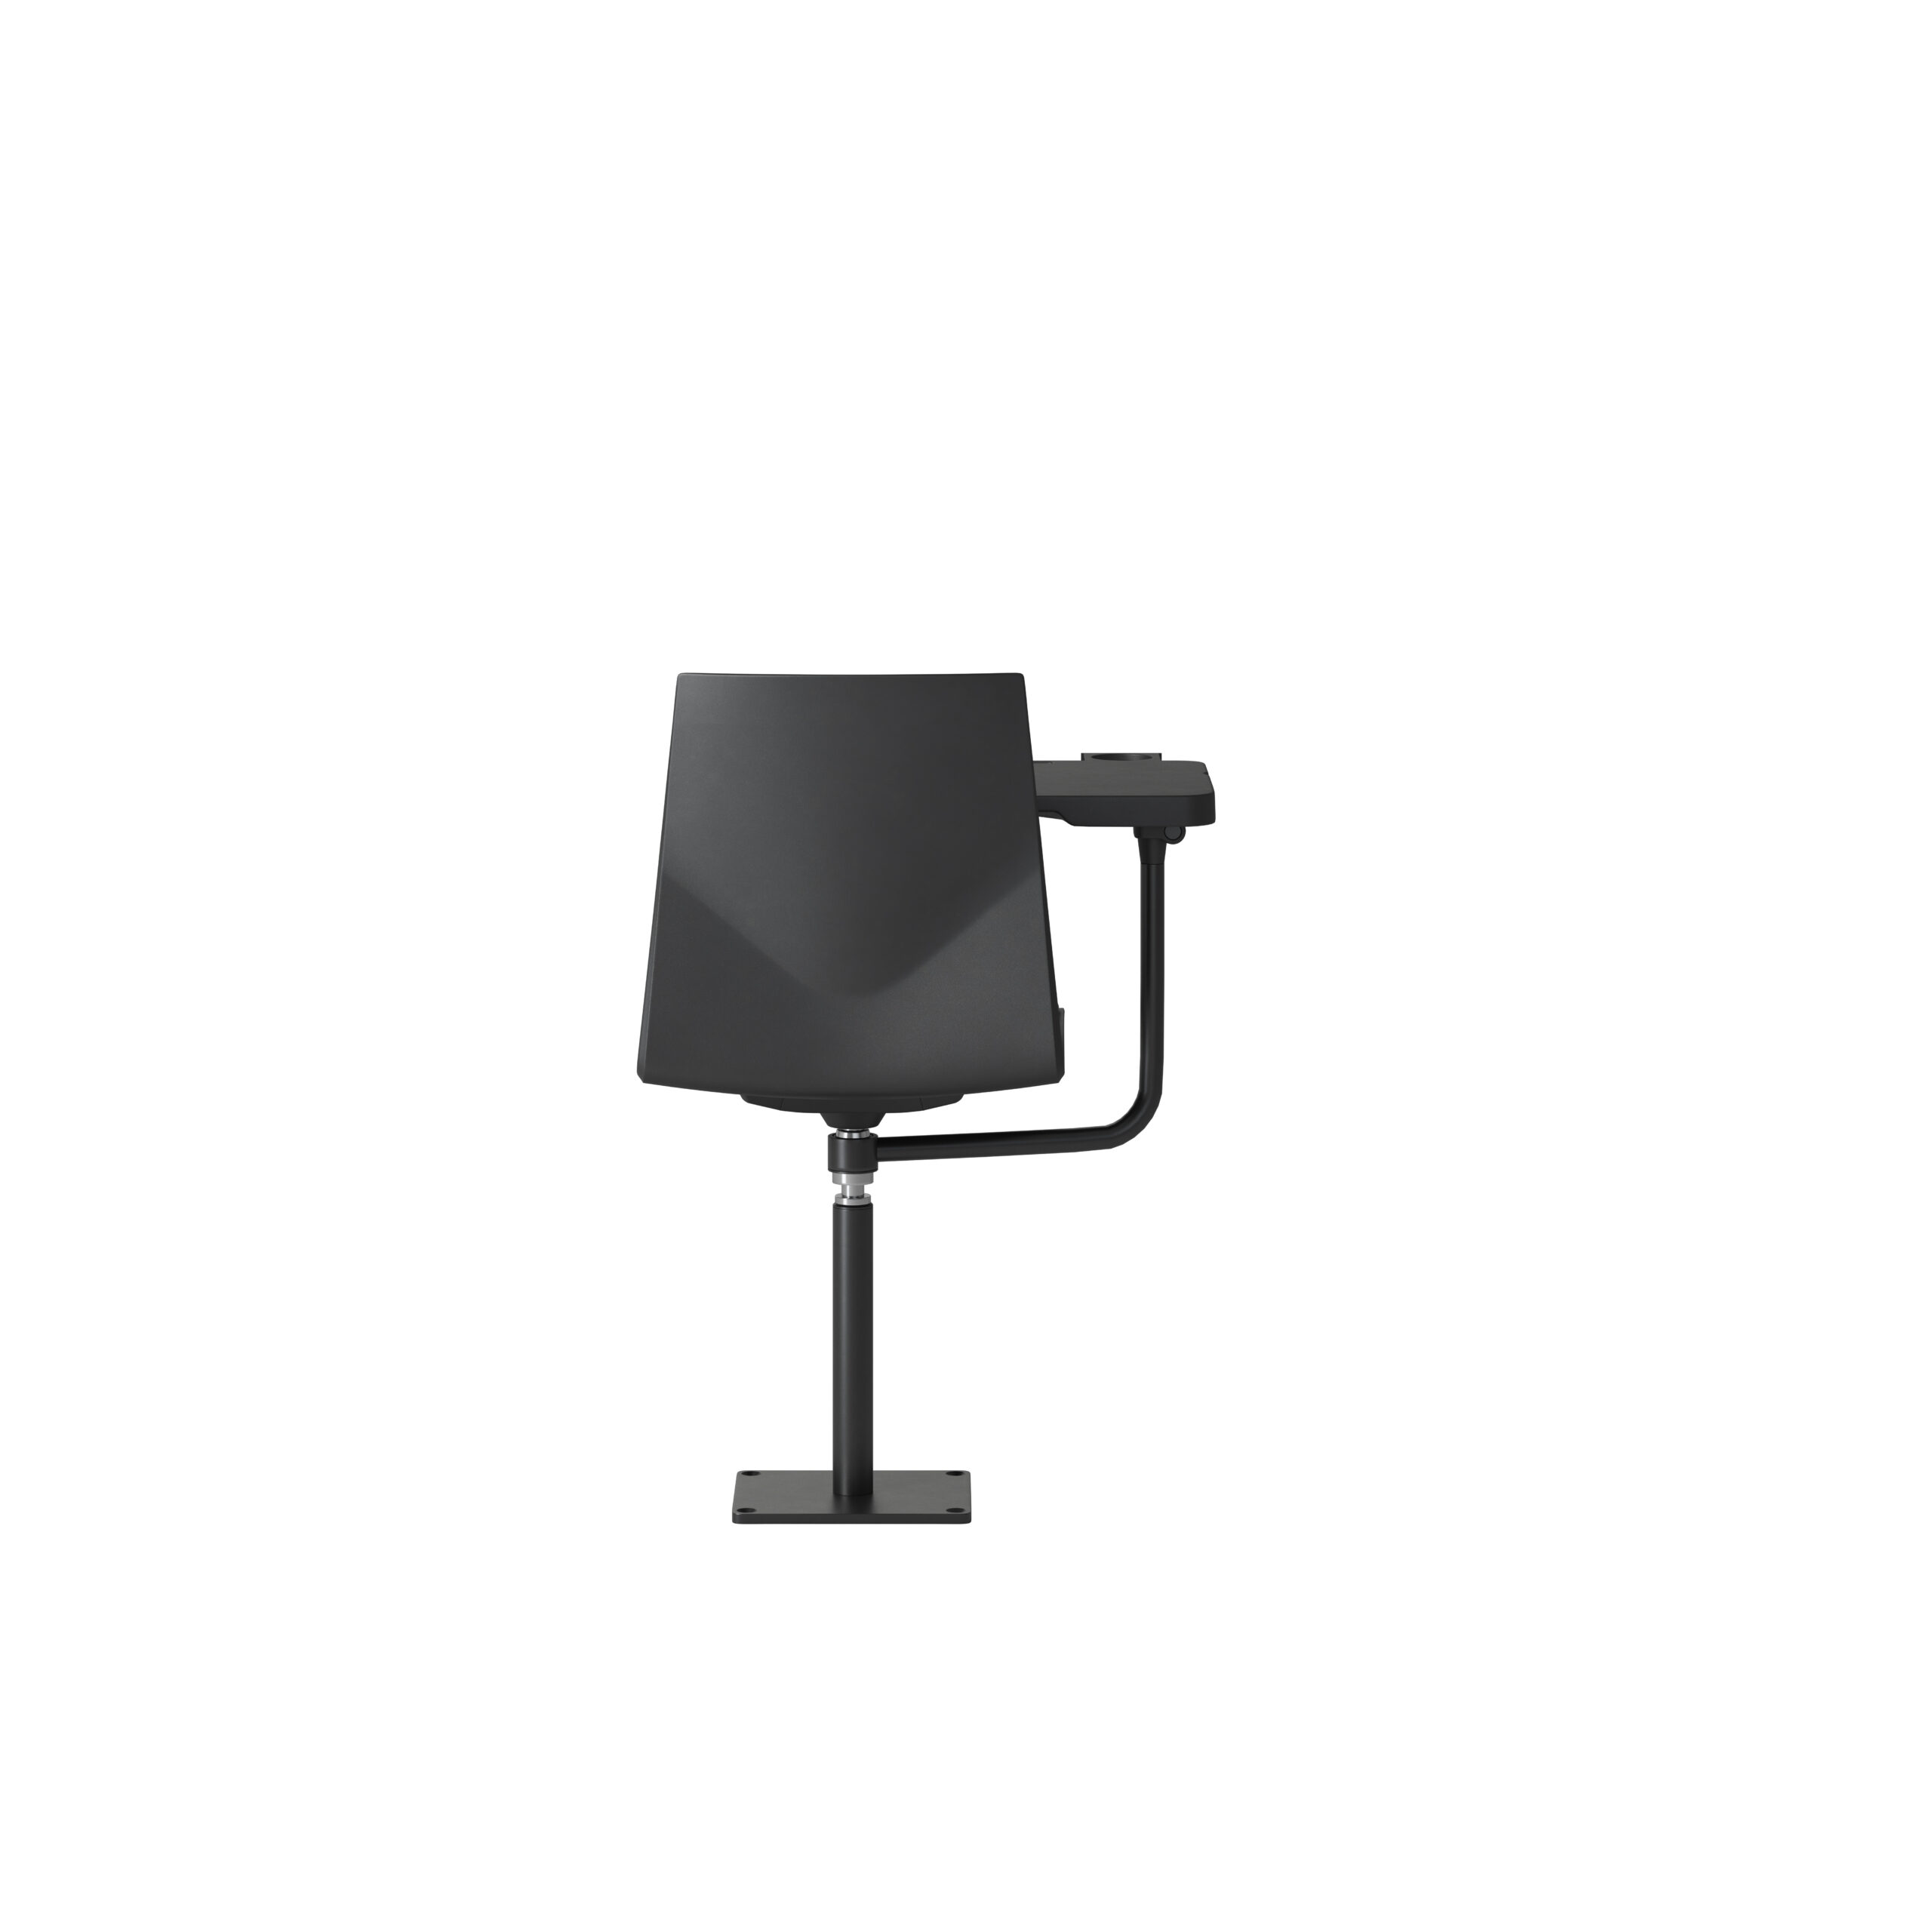 OCEE&FOUR - Chairs - FourCast2 Audi - Plastic shell - Seat Pad - Innotab - Swivel Frame - Packshot Image 1